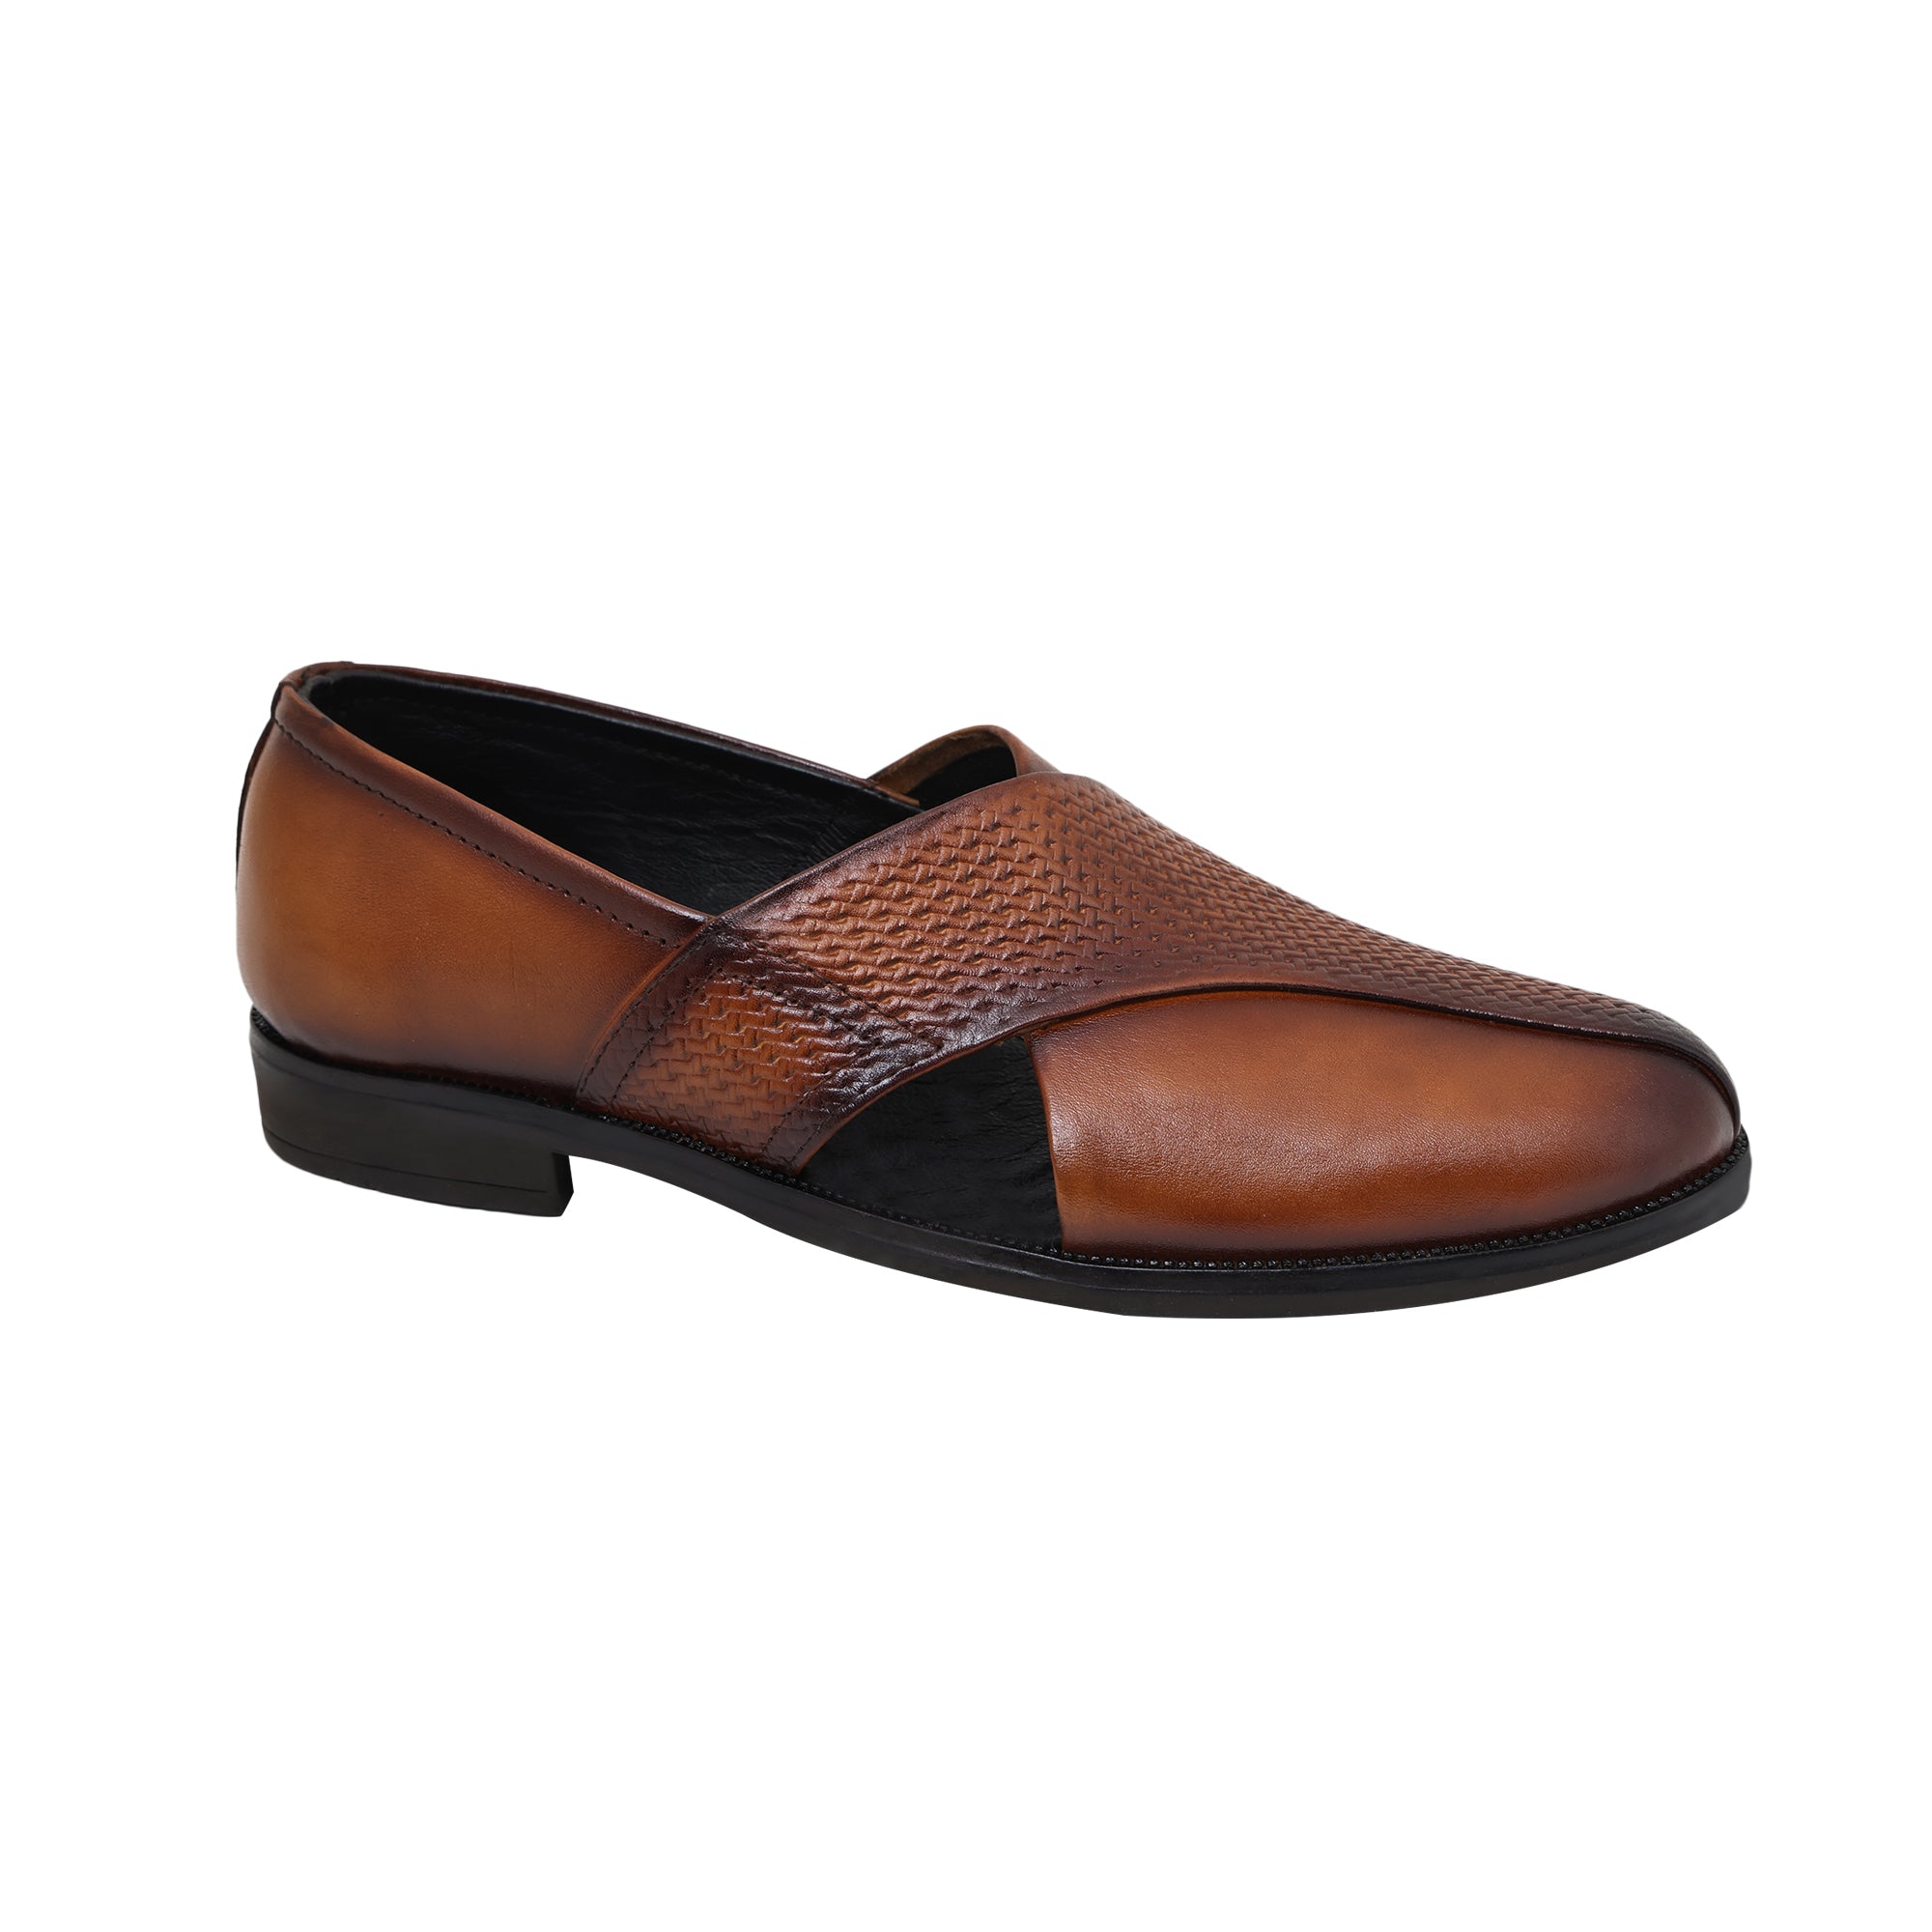 Louis Blanc Men’s Ethnic Leather Peshawari Slip On Shoes With TPR Sole (LB17)